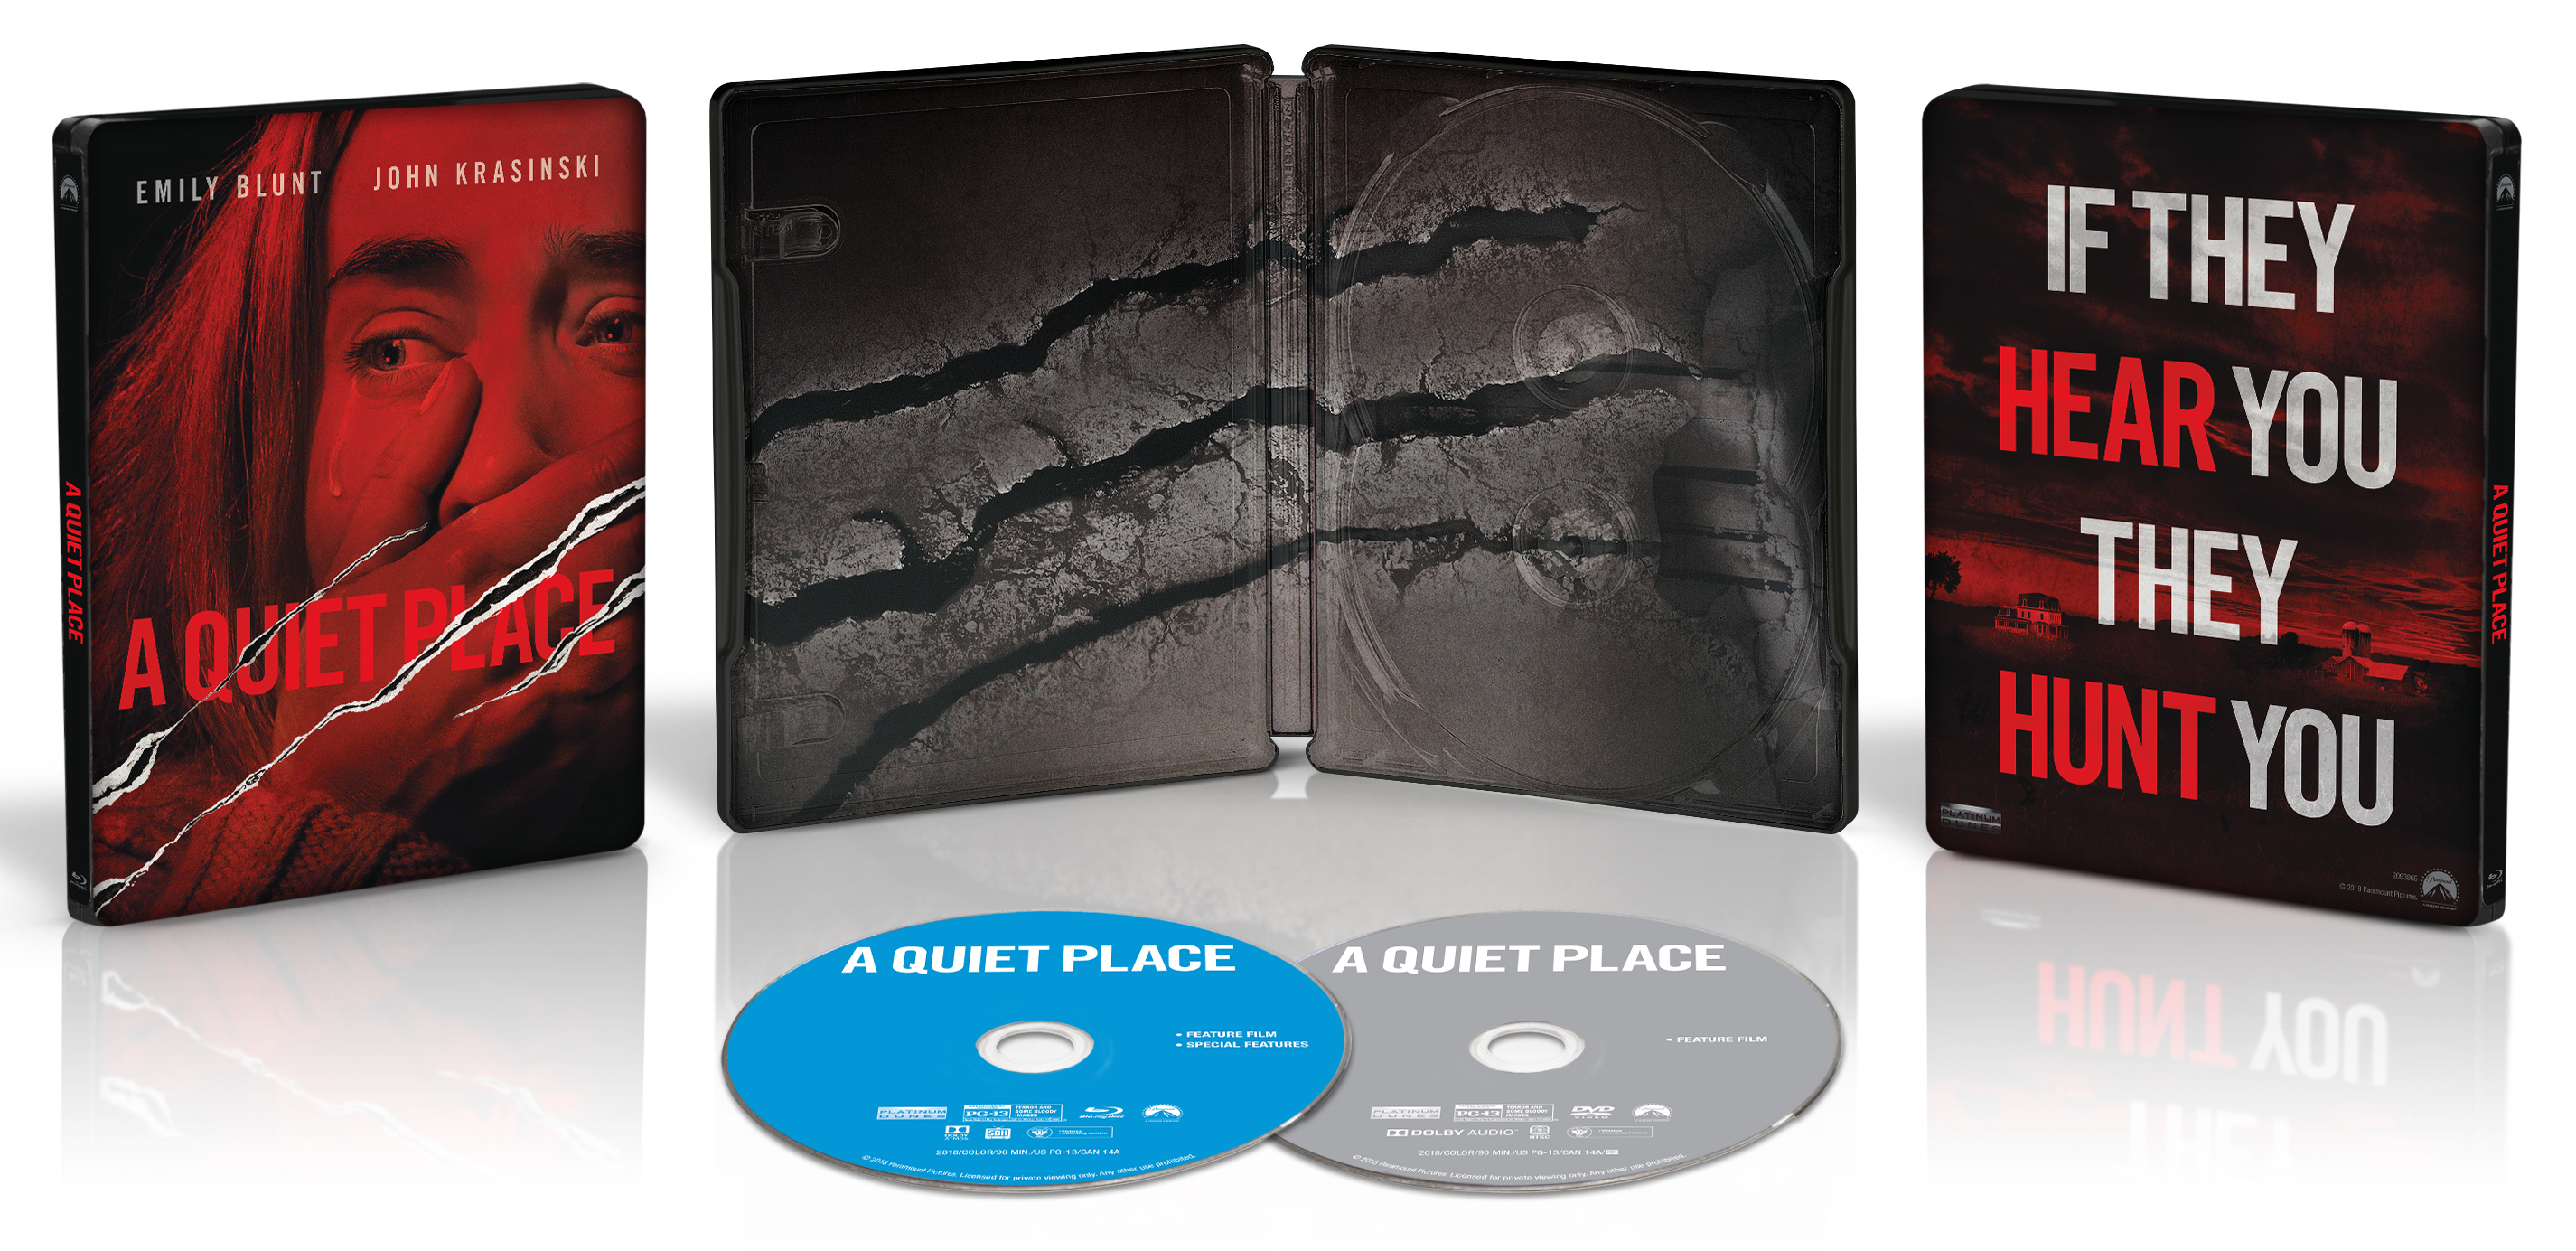 A Quiet Place [SteelBook] [Blu-ray/DVD] [Only @ Best Buy] [2018]